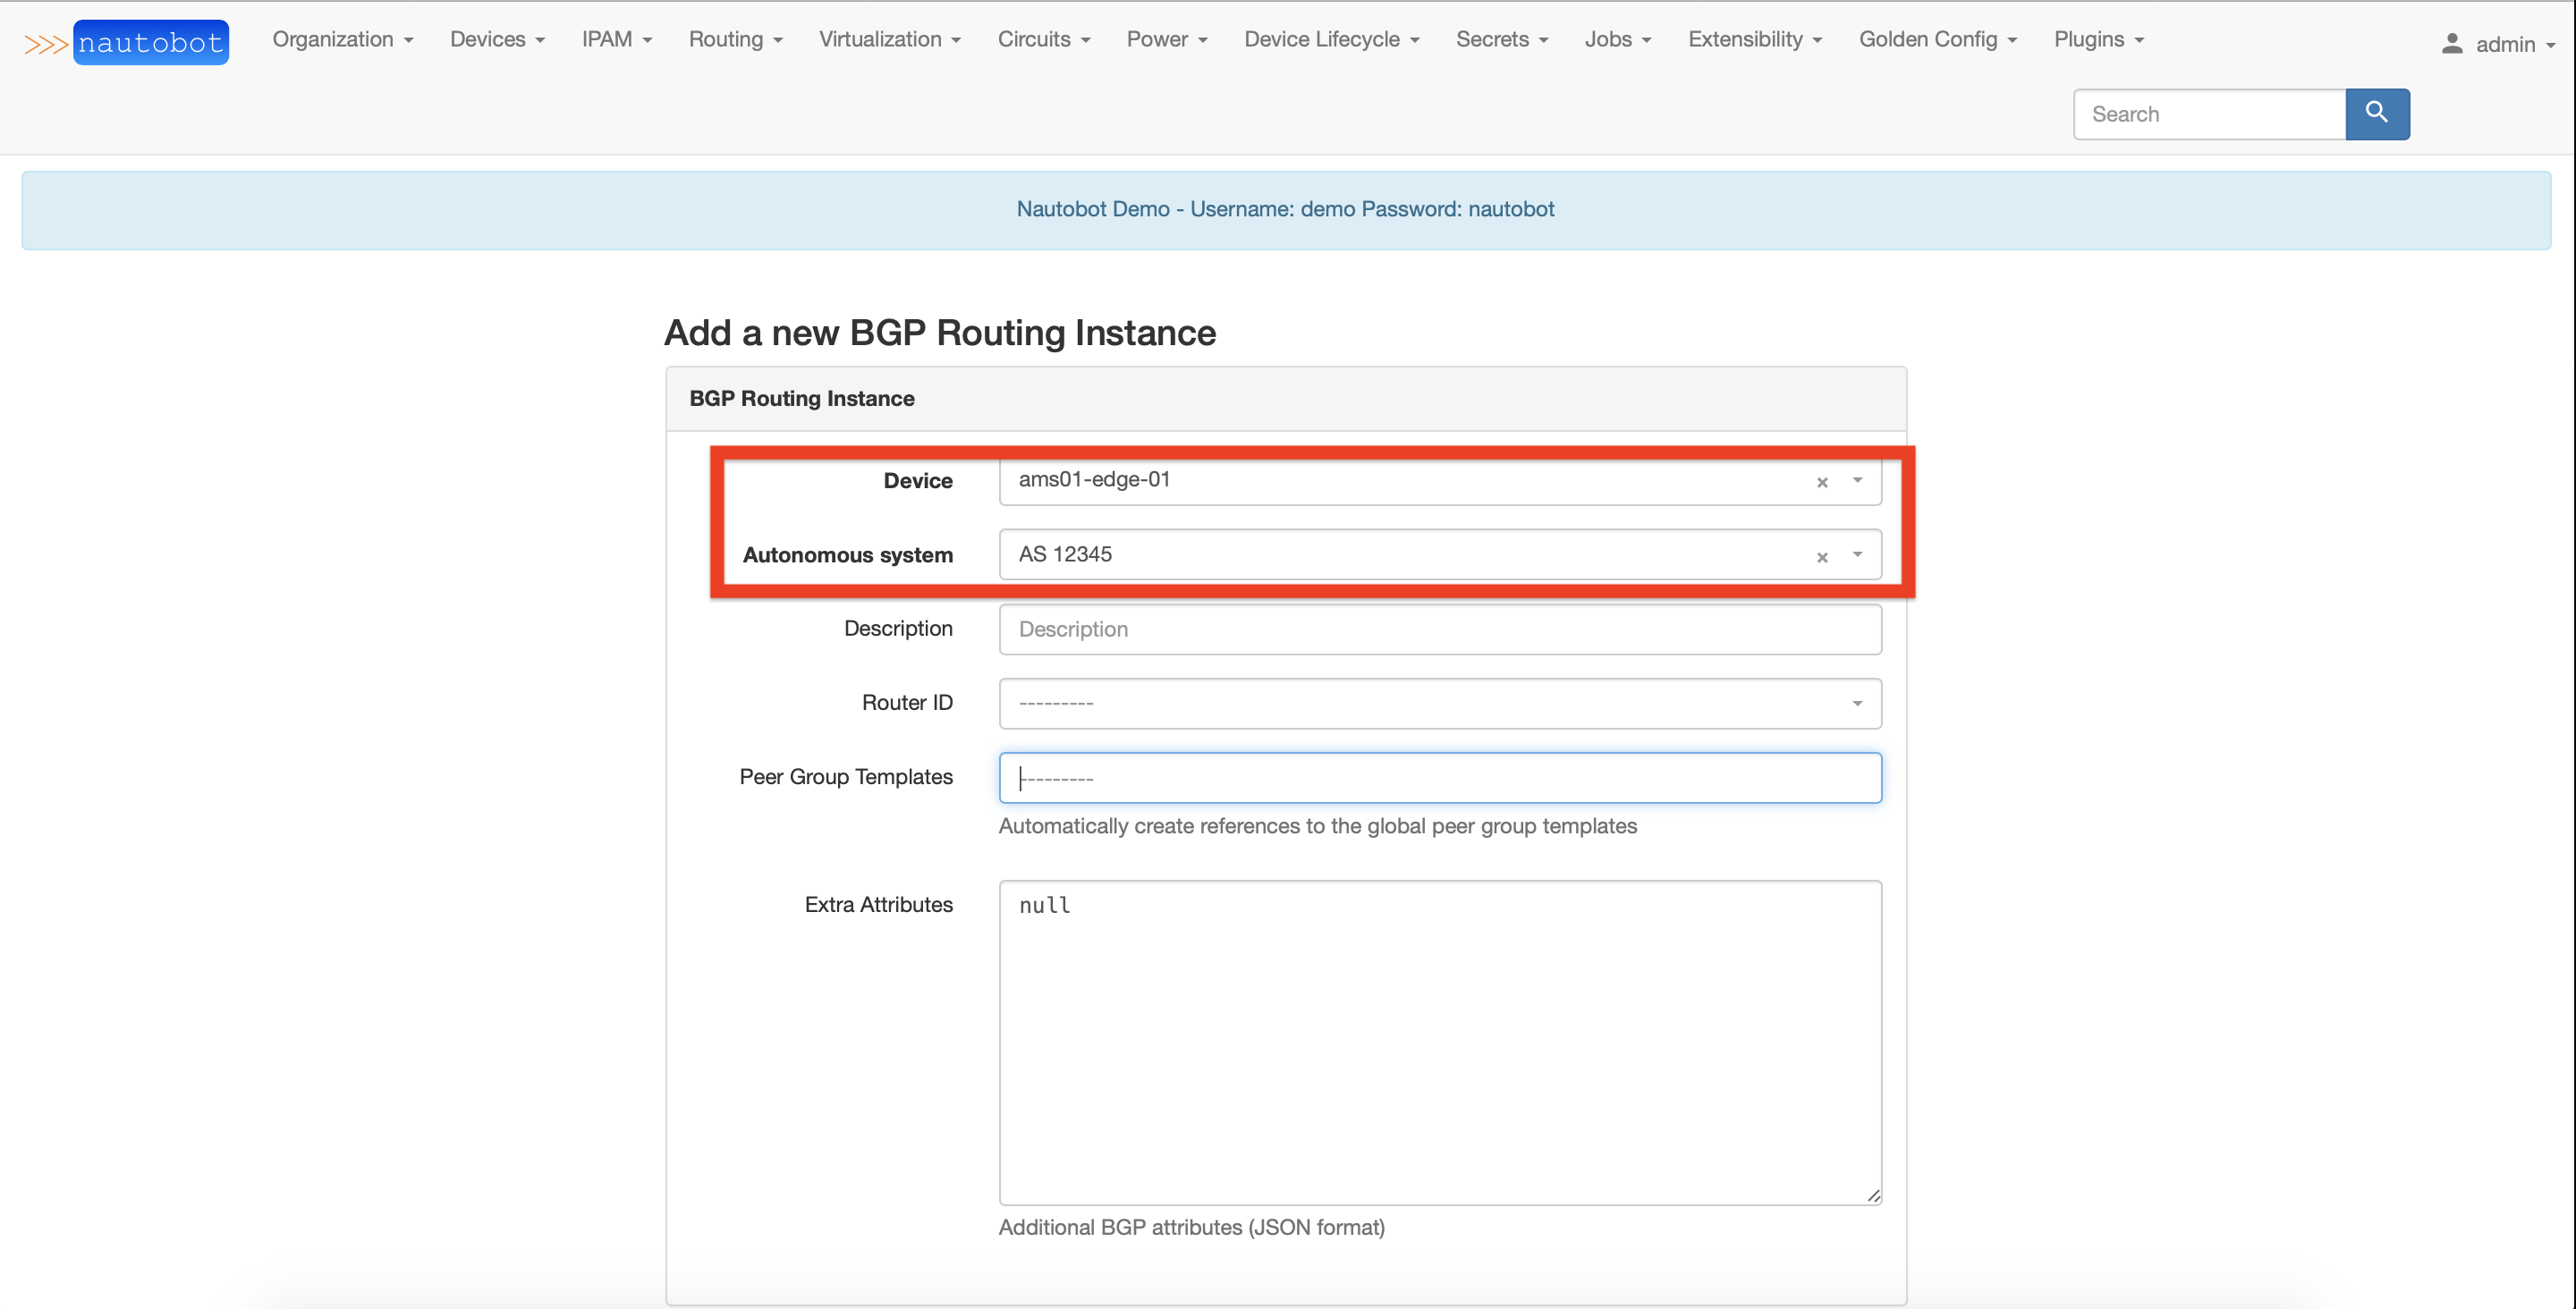 BGP Routing Instance Form